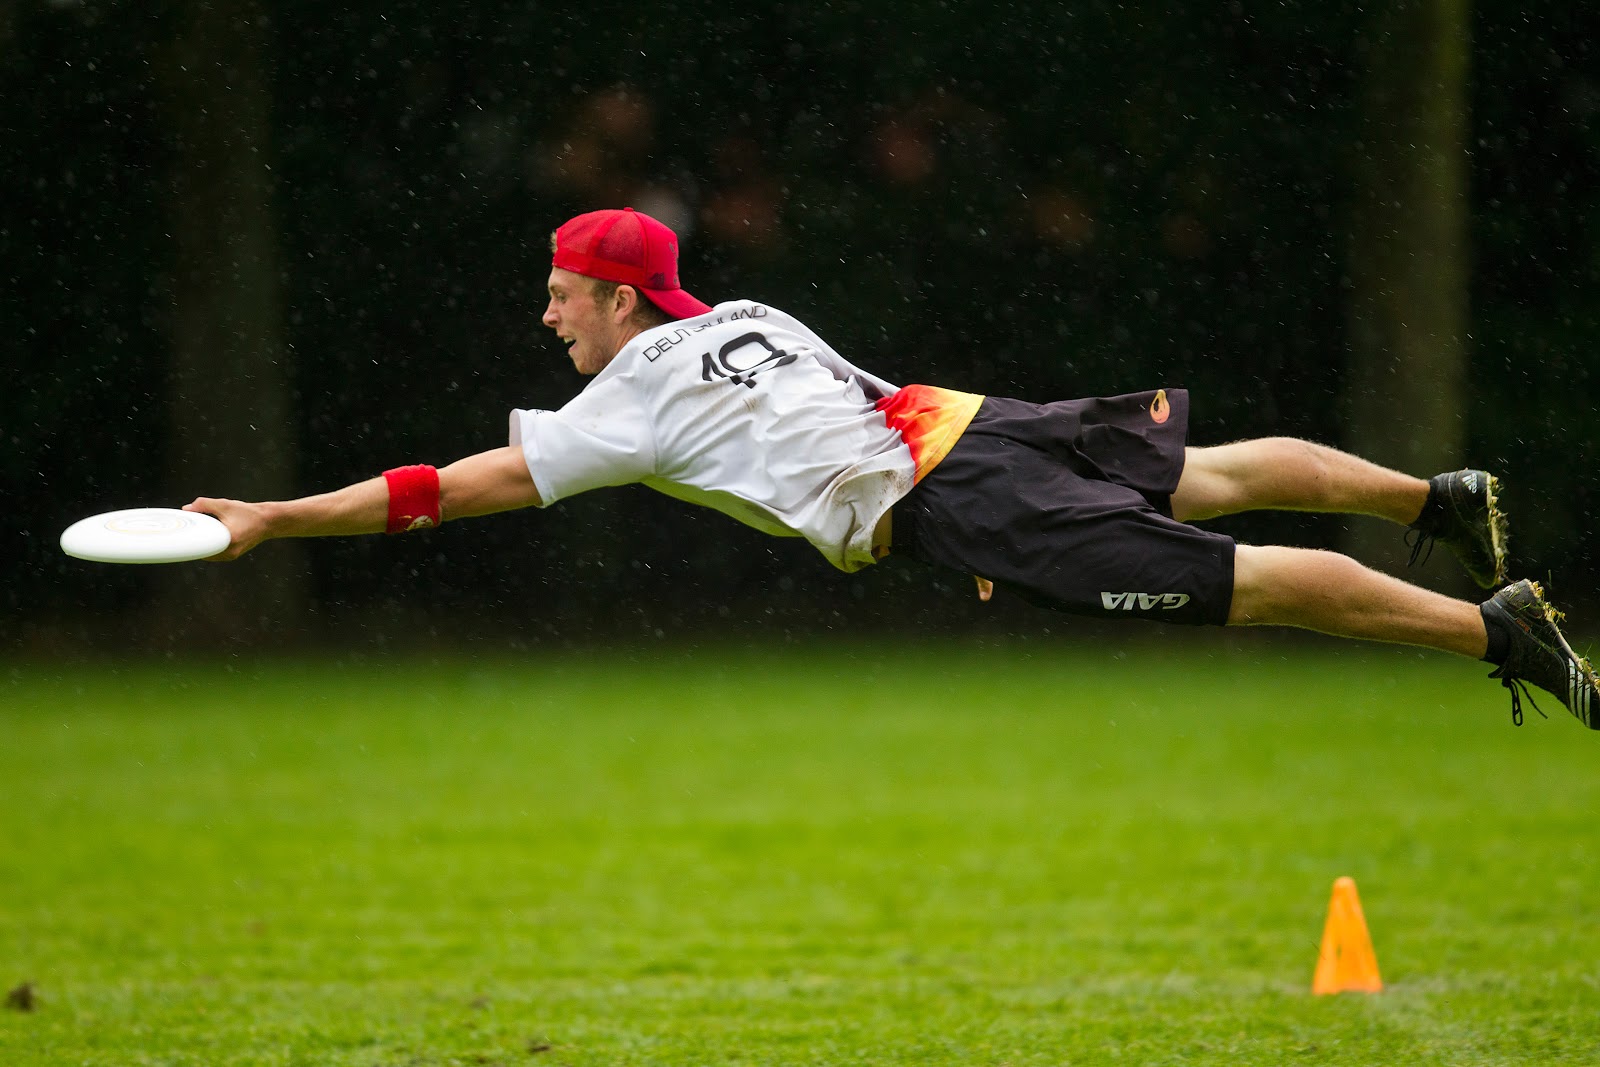 ESPN shows Ultimate live, now can Frisbee make the Olympics? | Zagsblog